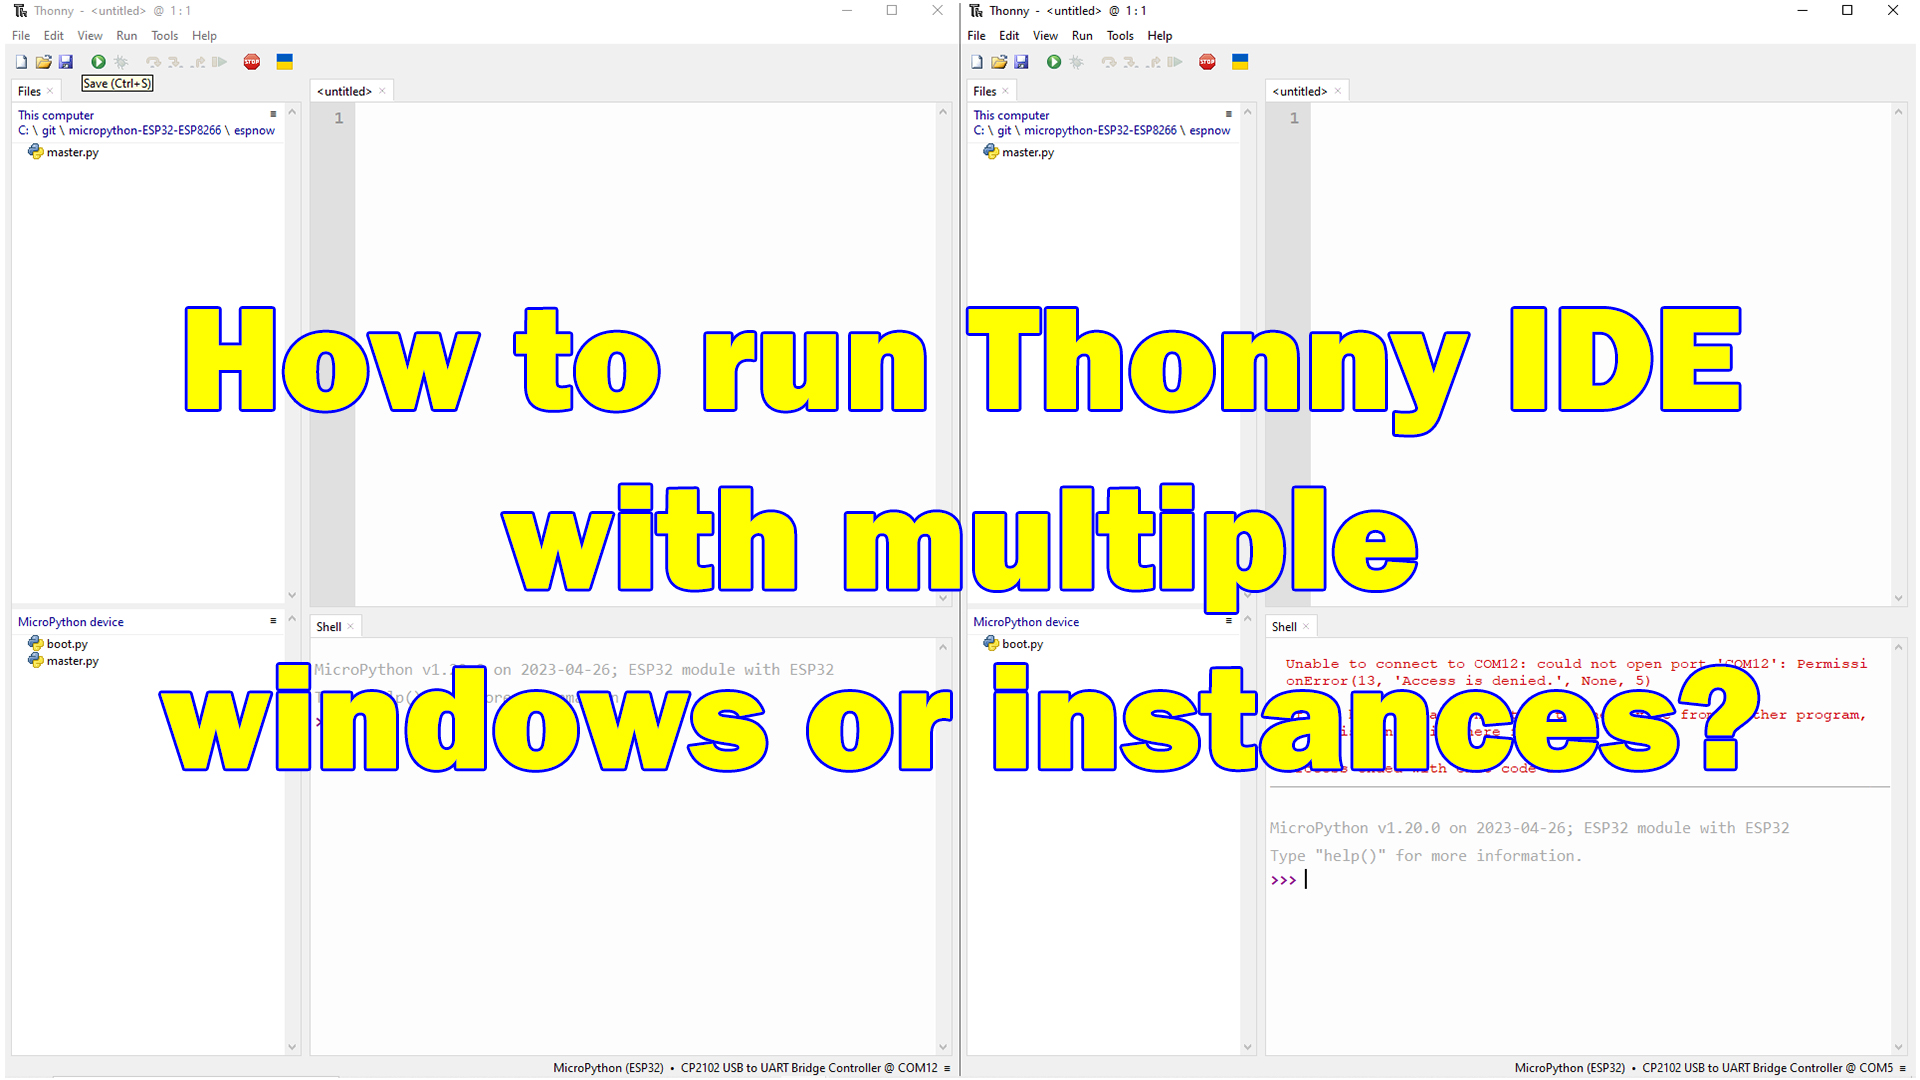 Featured Image - Thonny IDE Multiple Instances or Windows